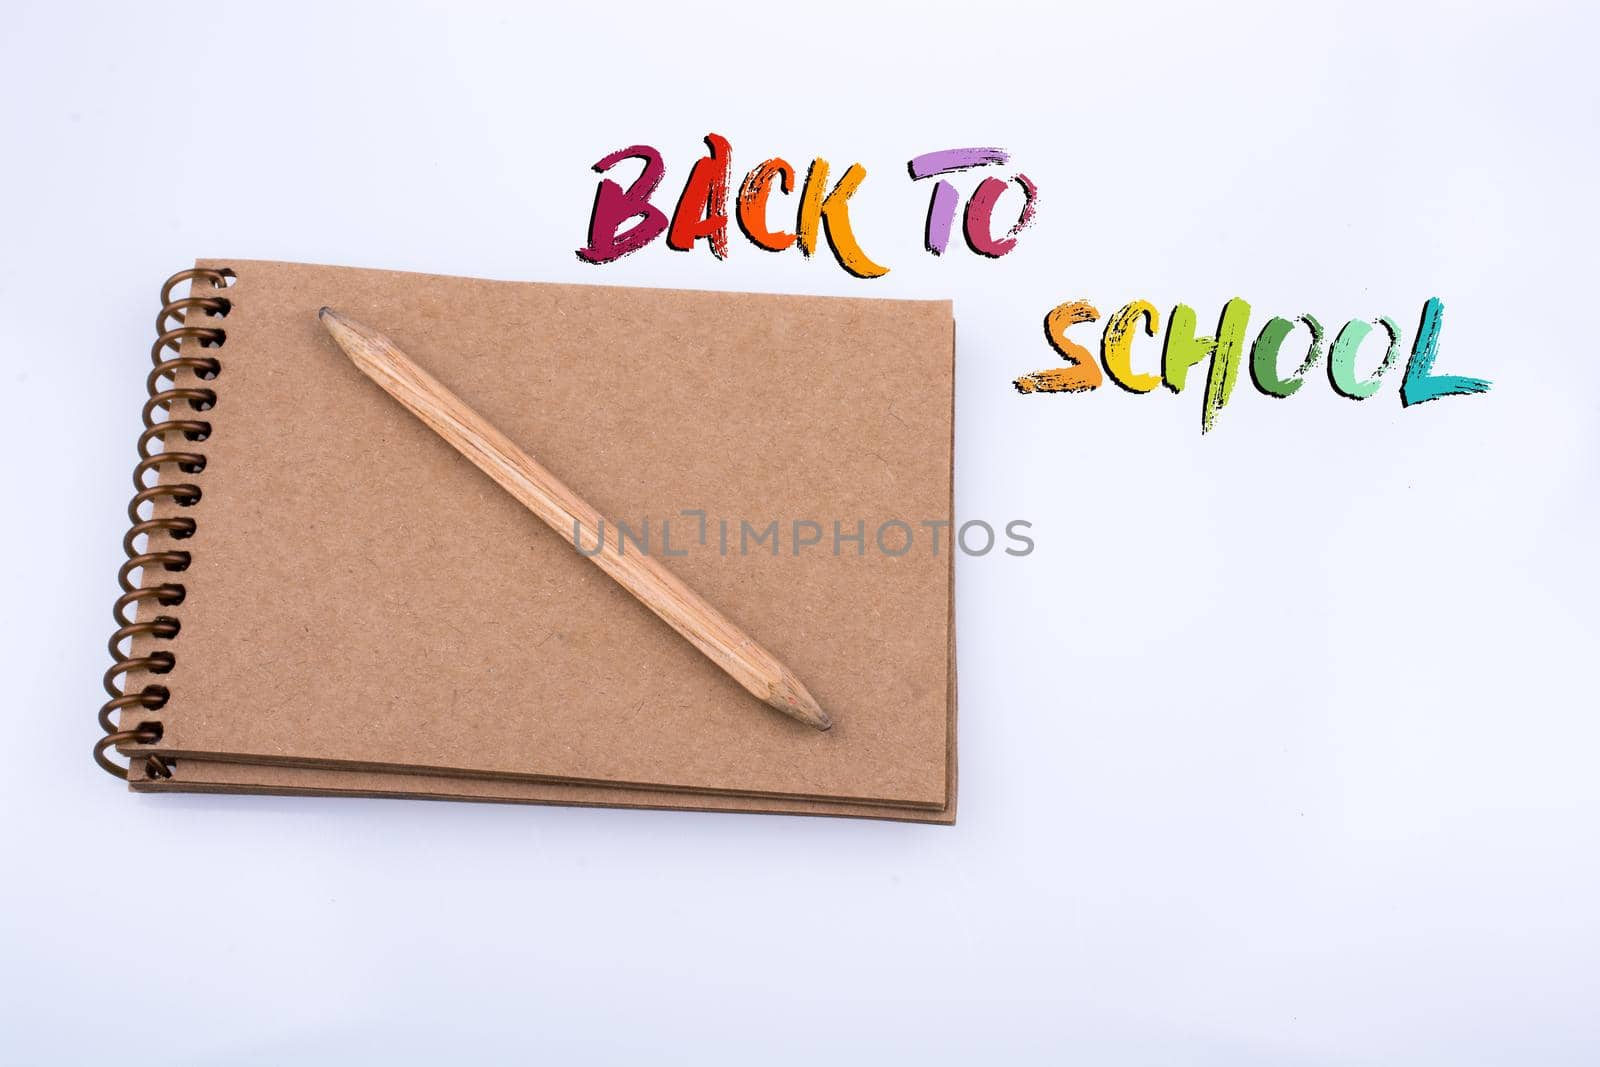 Back to school wording as education, teaching and learning concept